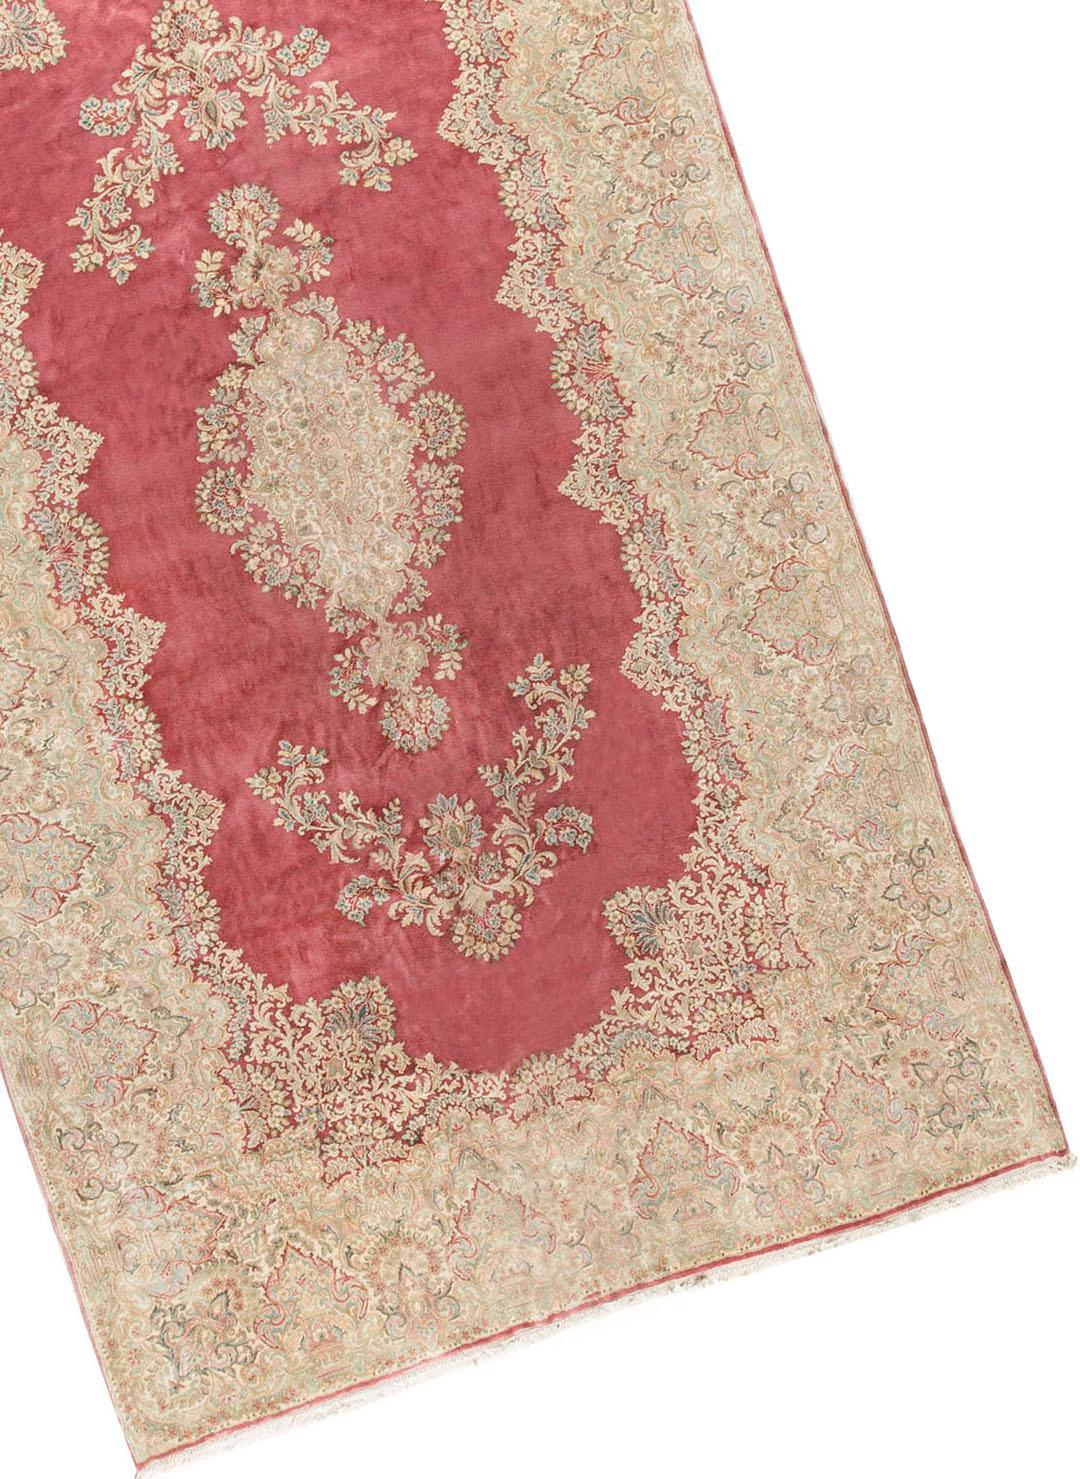 Antique Persian Kerman rug, circa 1890. This lovely rug has a soft rose ground with central floral filled medallions. The border repeats this floral theme with a profusion of beautiful and intricate designs enclosing the central field and almost